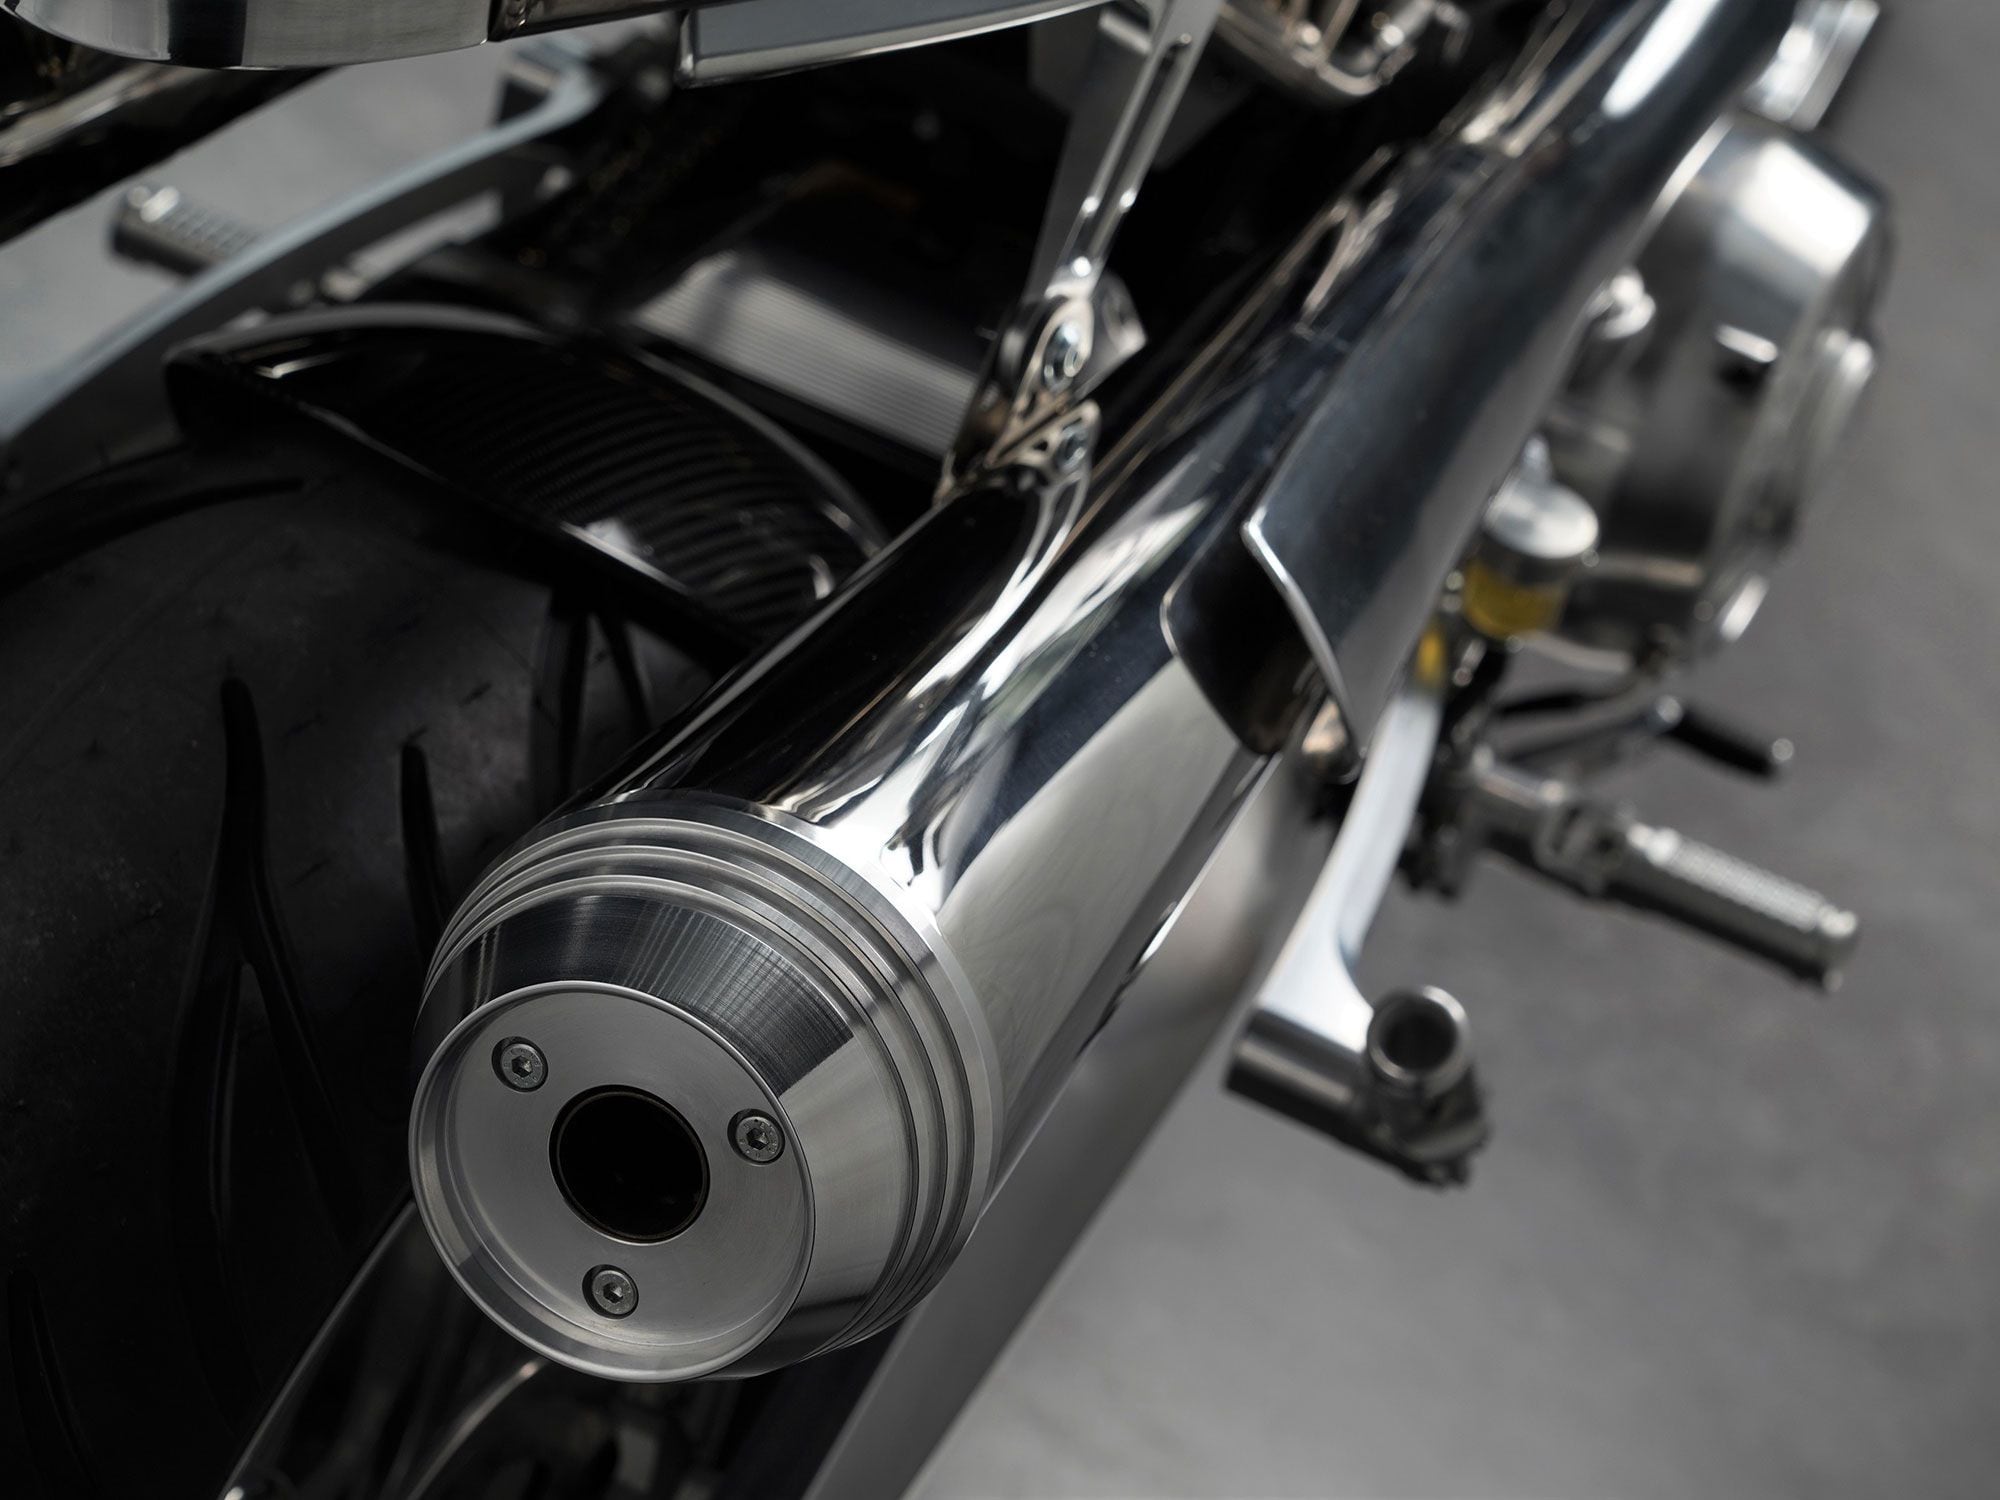 Even the high-mount pipes on either side sport meticulous detailing.